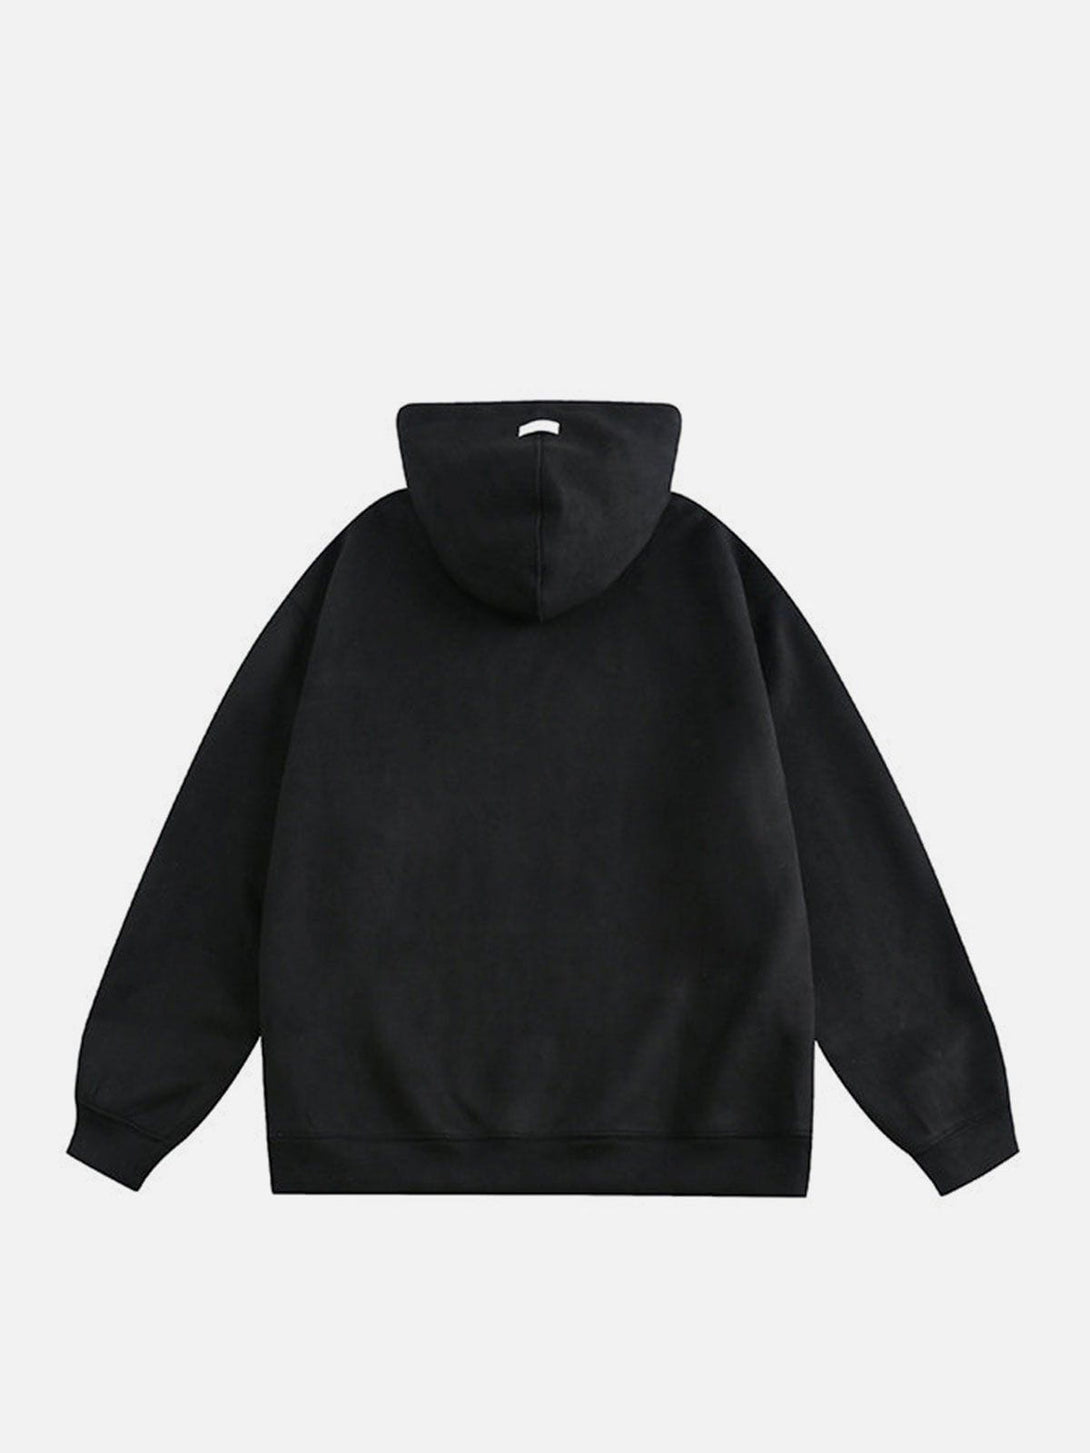 Levefly - Letter Print Solid Hoodie - Streetwear Fashion - levefly.com